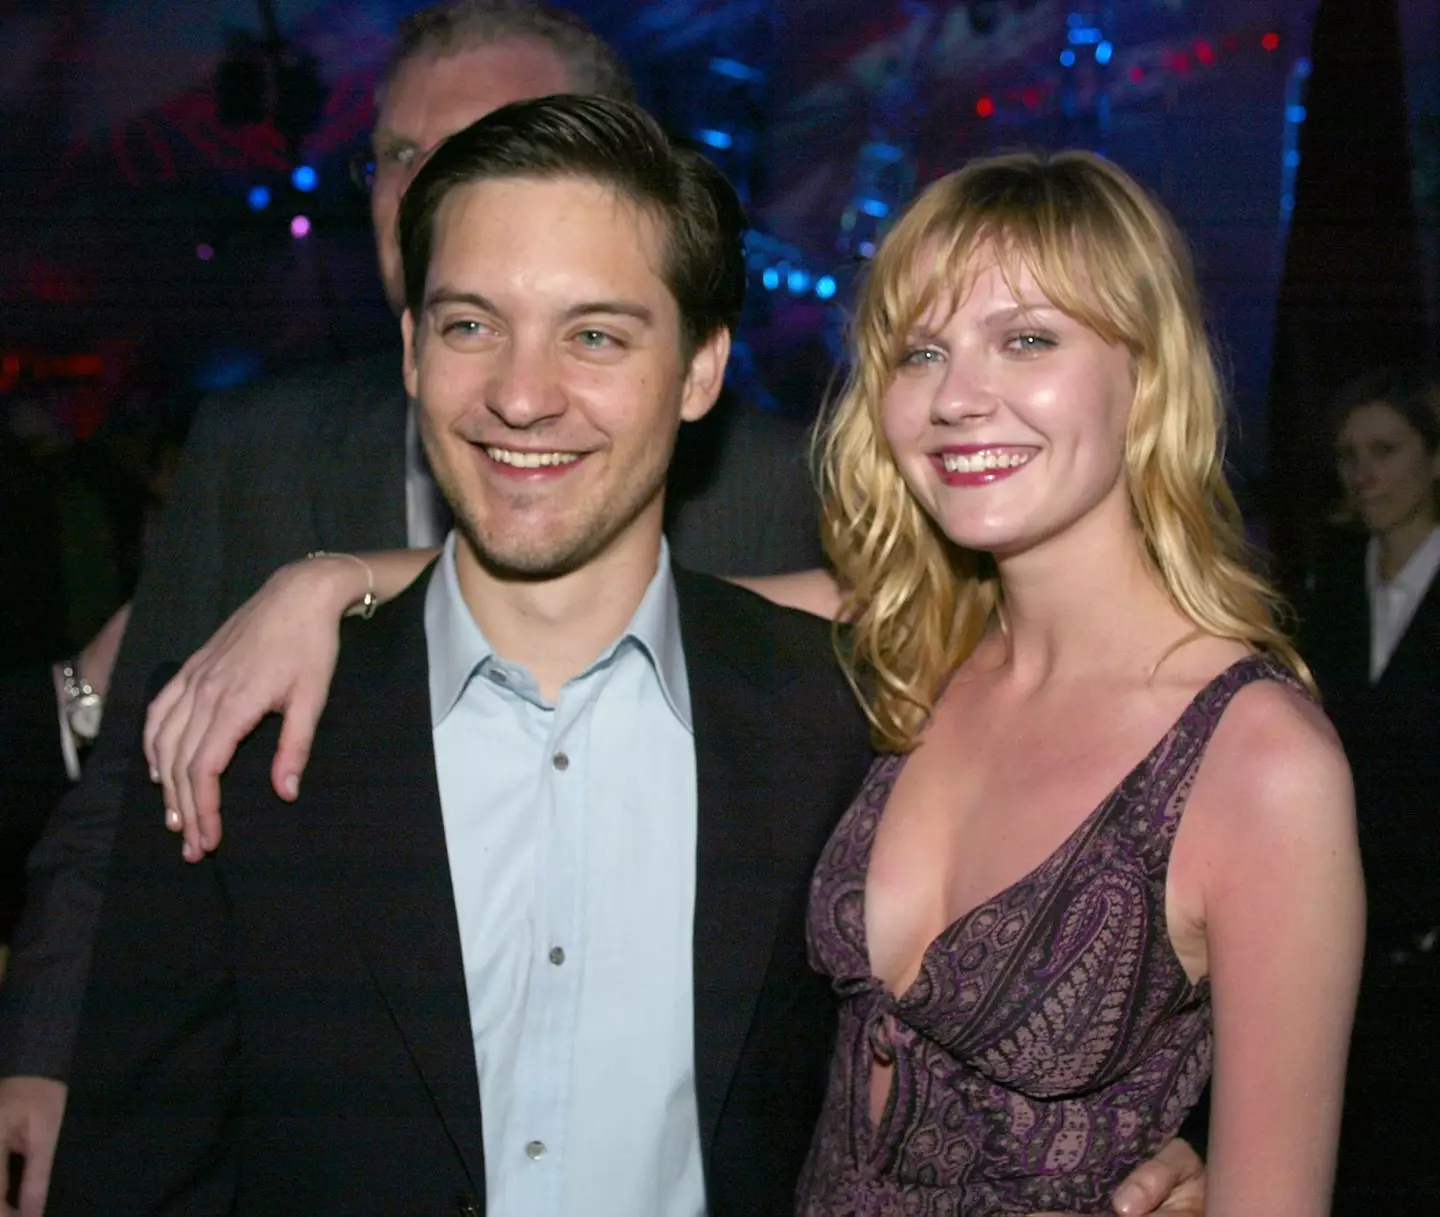 Tobey Maguire and Kirsten Dunst at the premiere of Spider-Man.